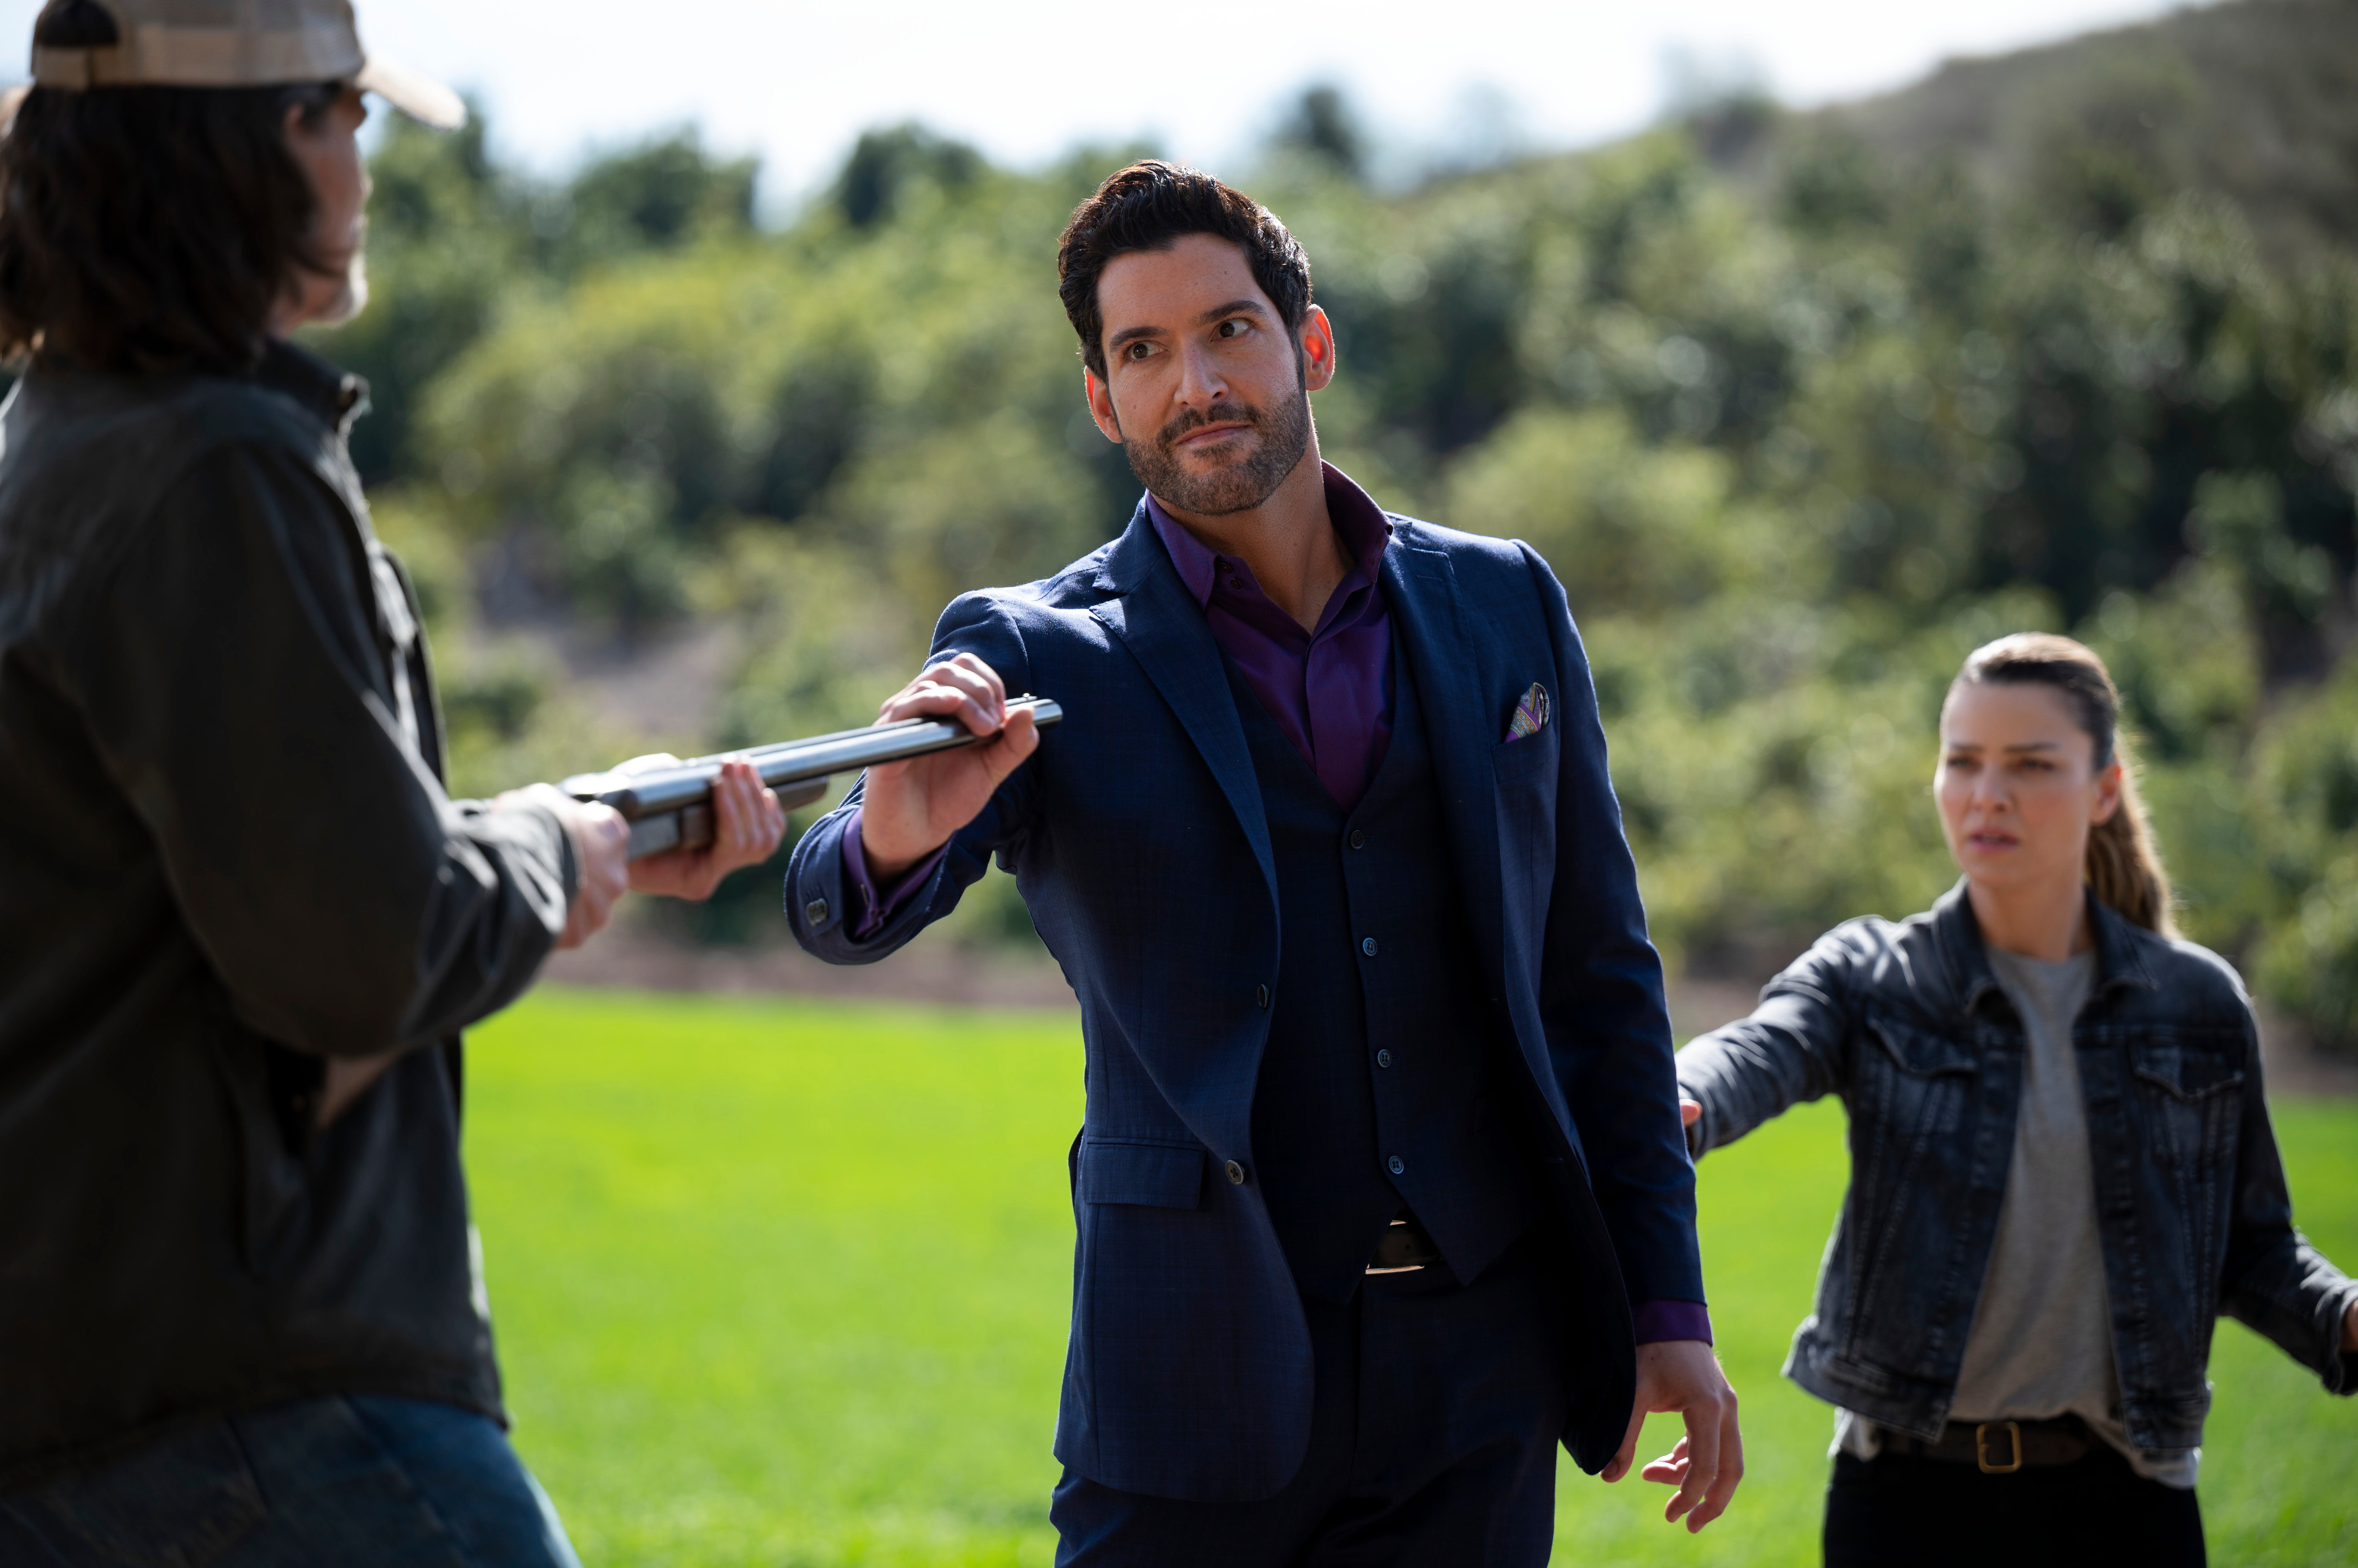 Lucifer season 6: Why is Lucifer ending and won’t there be a season 7?